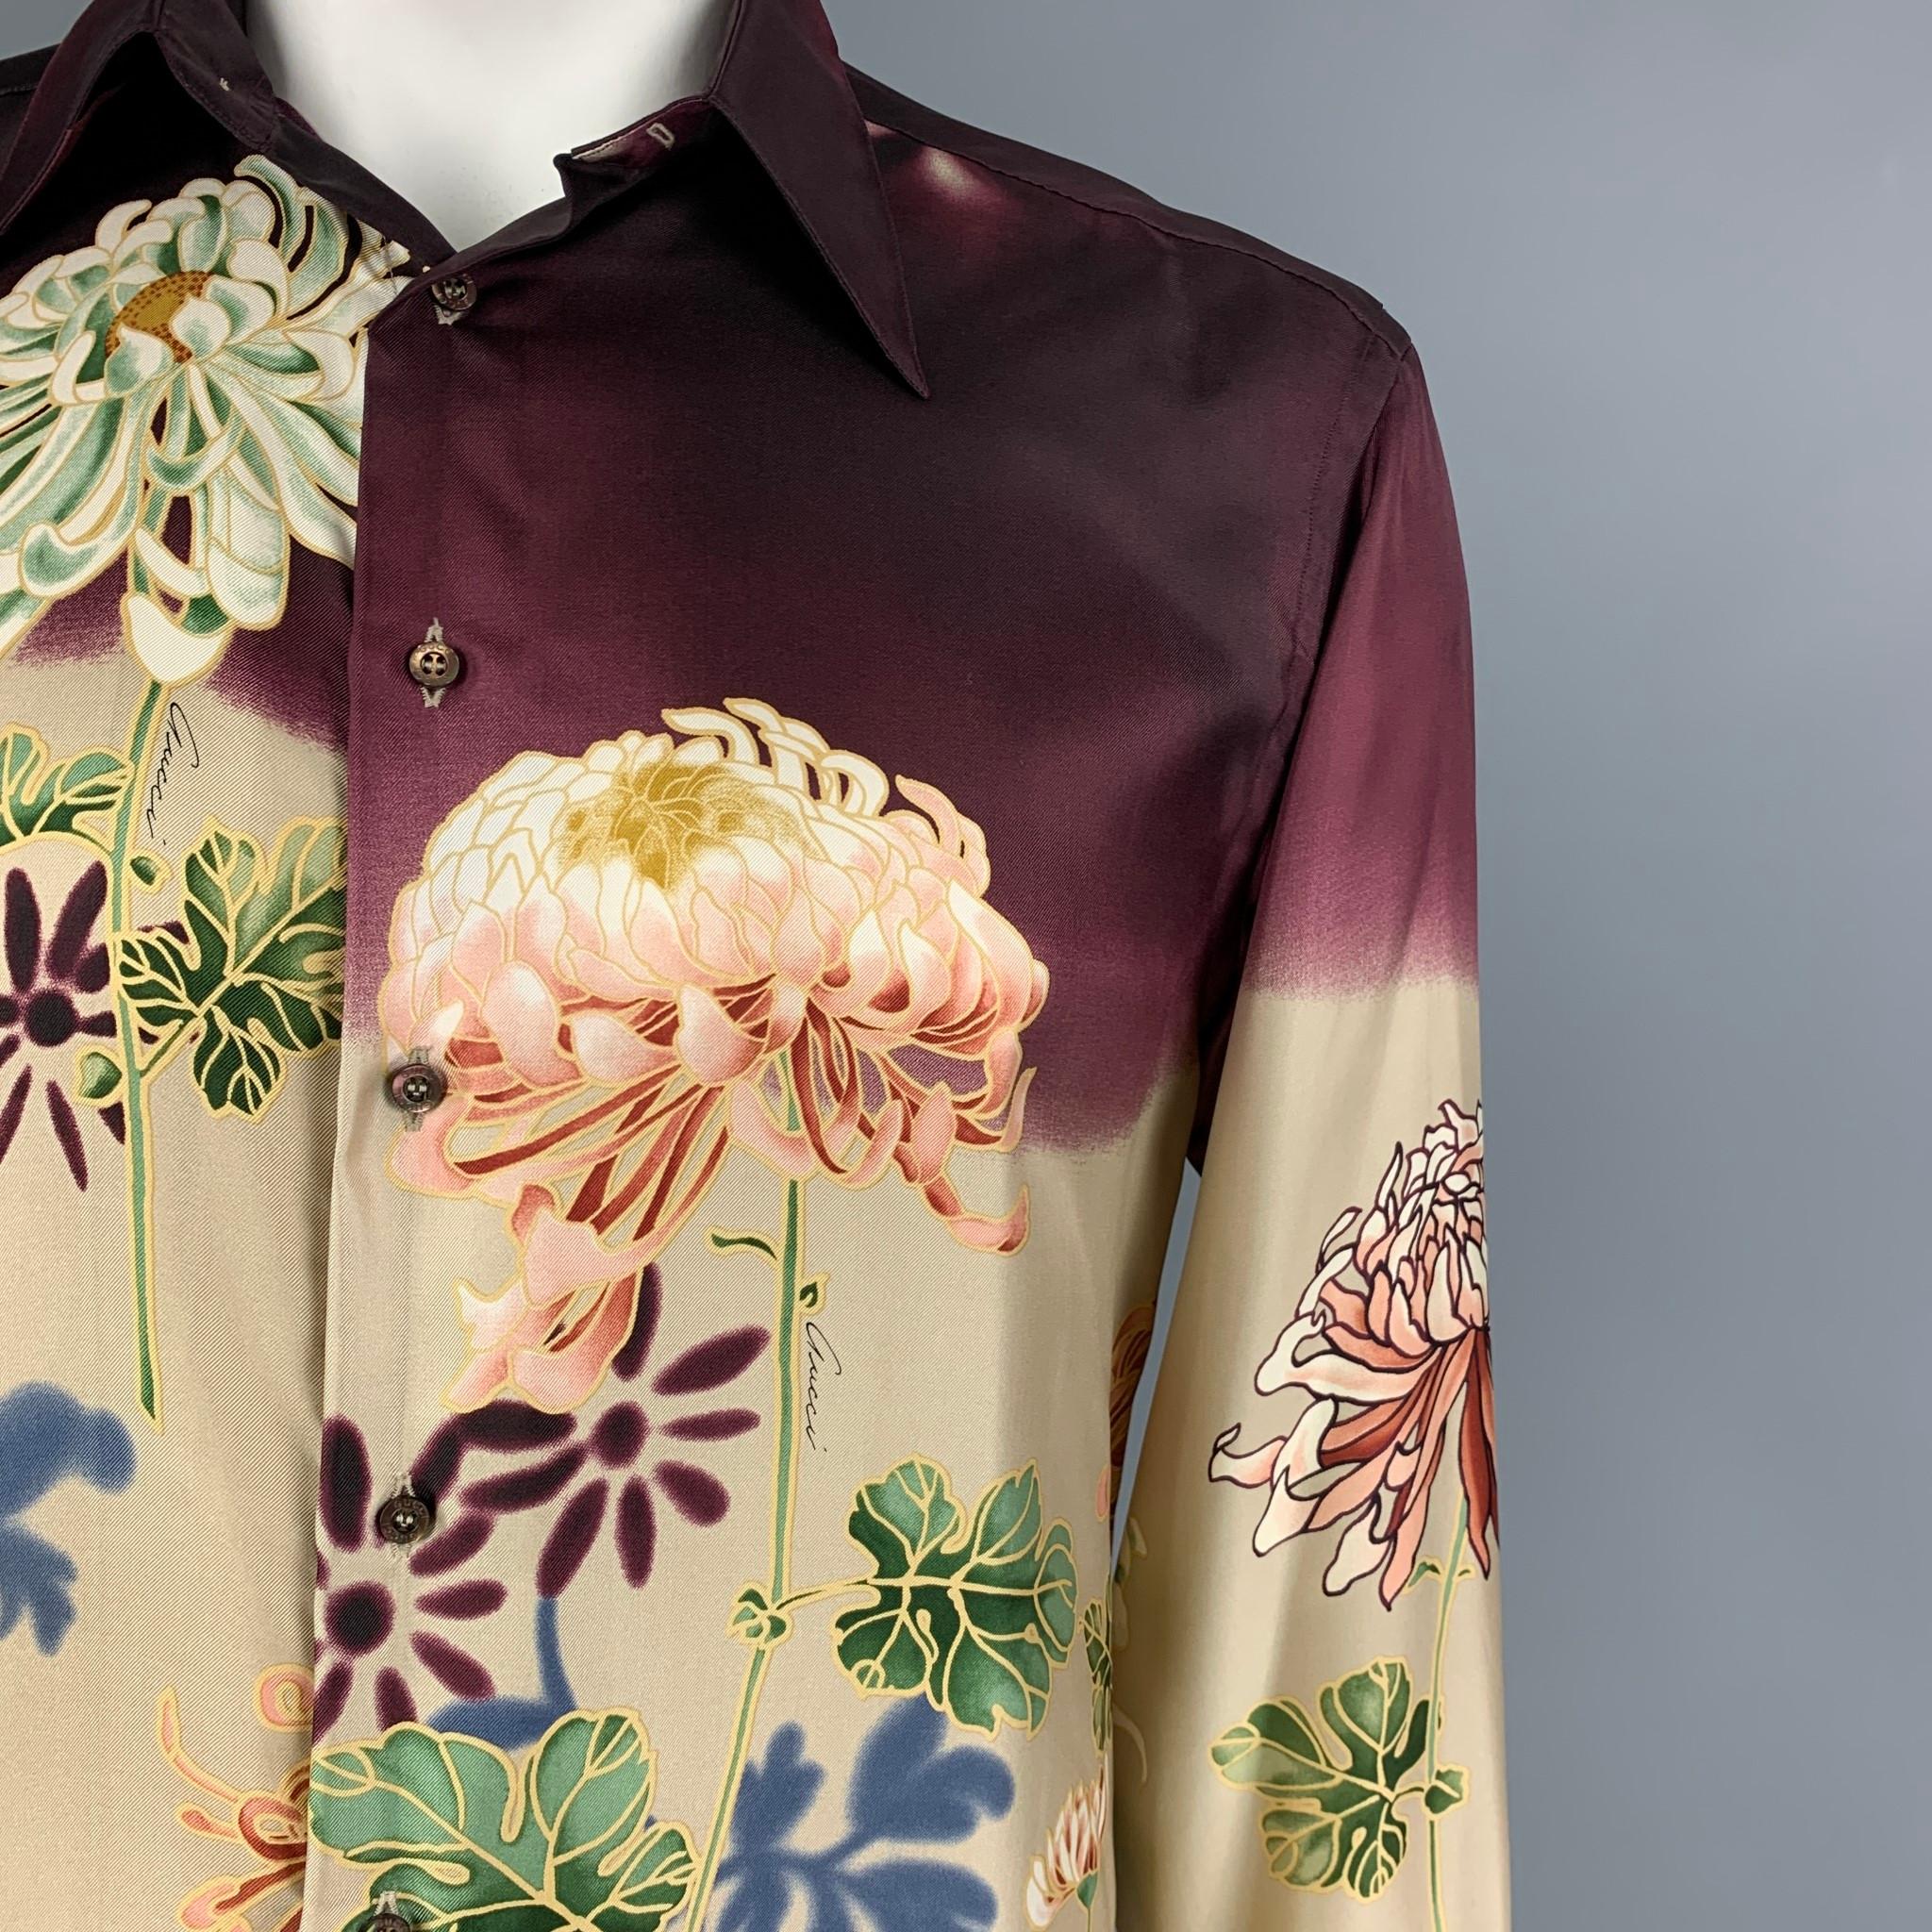 Vintage GUCCI by Tom Ford 2003 long sleeve shirt comes in a beige chrysanthemum floral print silk featuring a spread collar and a button up closure. Made in Italy.

Very Good Pre-Owned Condition.
Marked: 40-15 3/4

Measurements:

Shoulder: 20